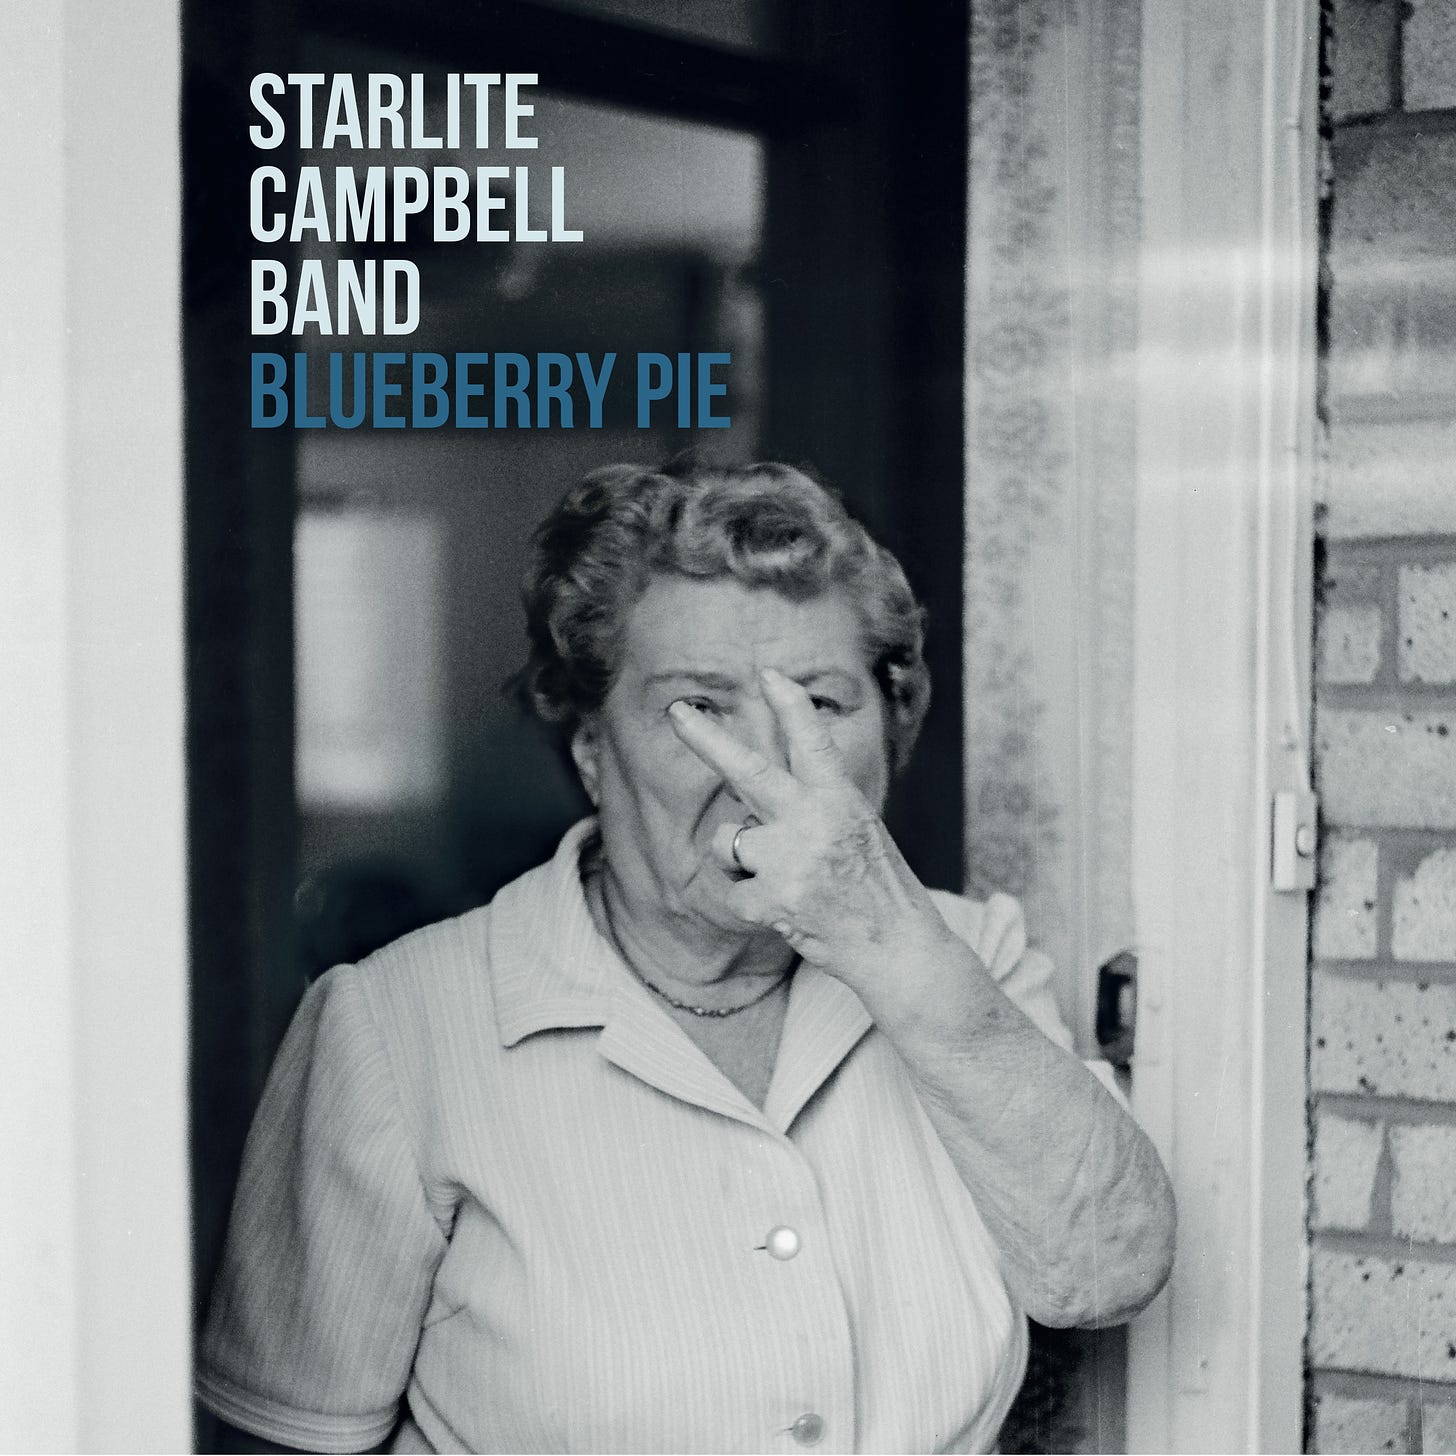 Album cover of Starlite Campbell Band ‘Blueberry Pie’ featuring my phot of Betty Higgs